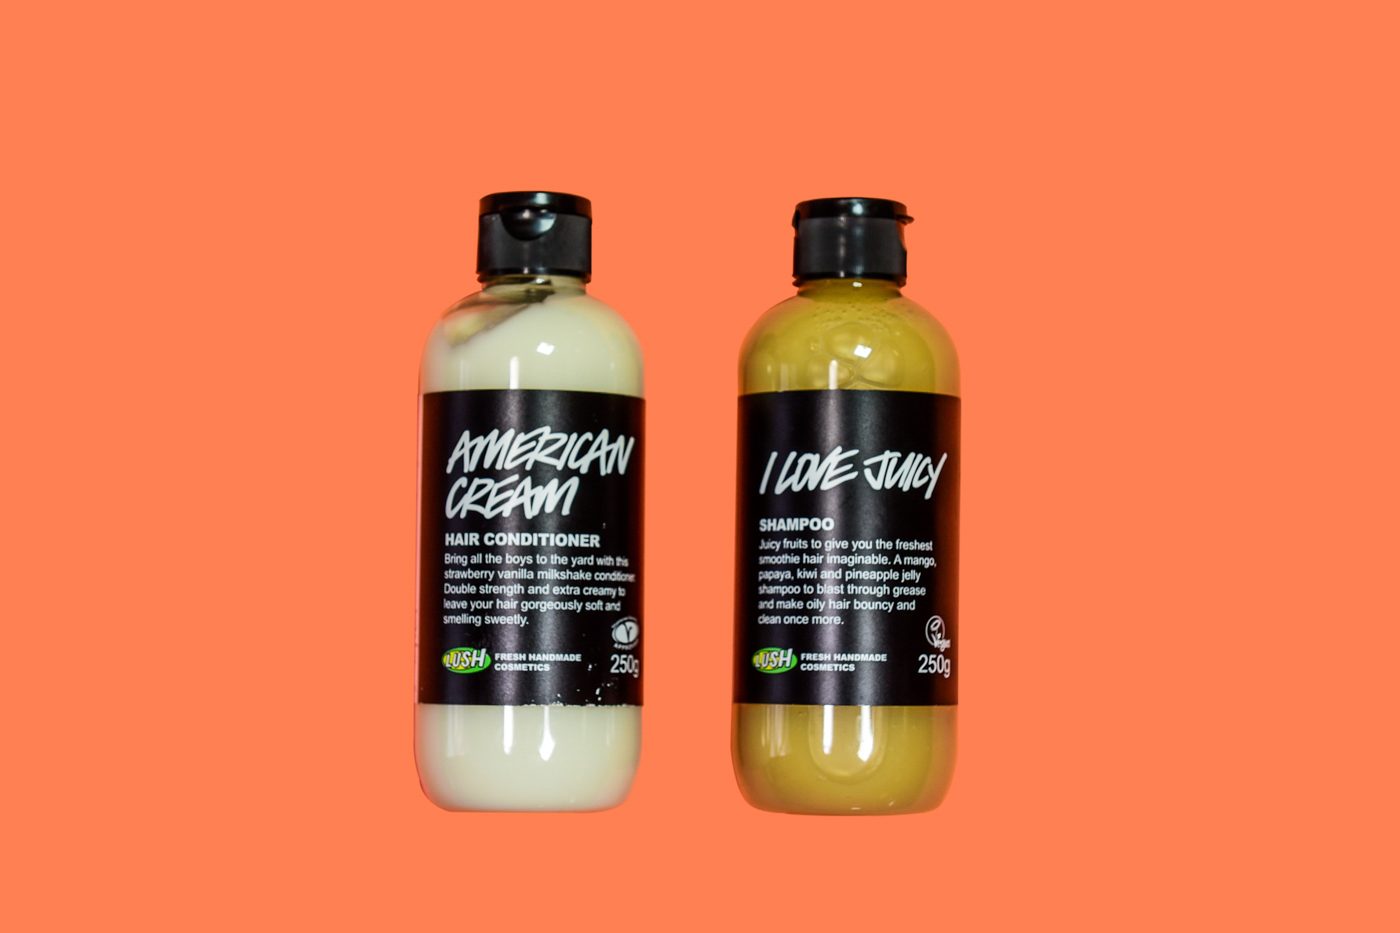  American Cream conditioner (P475 for 100g) and I Love Juicy shampoo (P445 for 100g) from Lush. Photo by Alecs Ongcal/Rappler